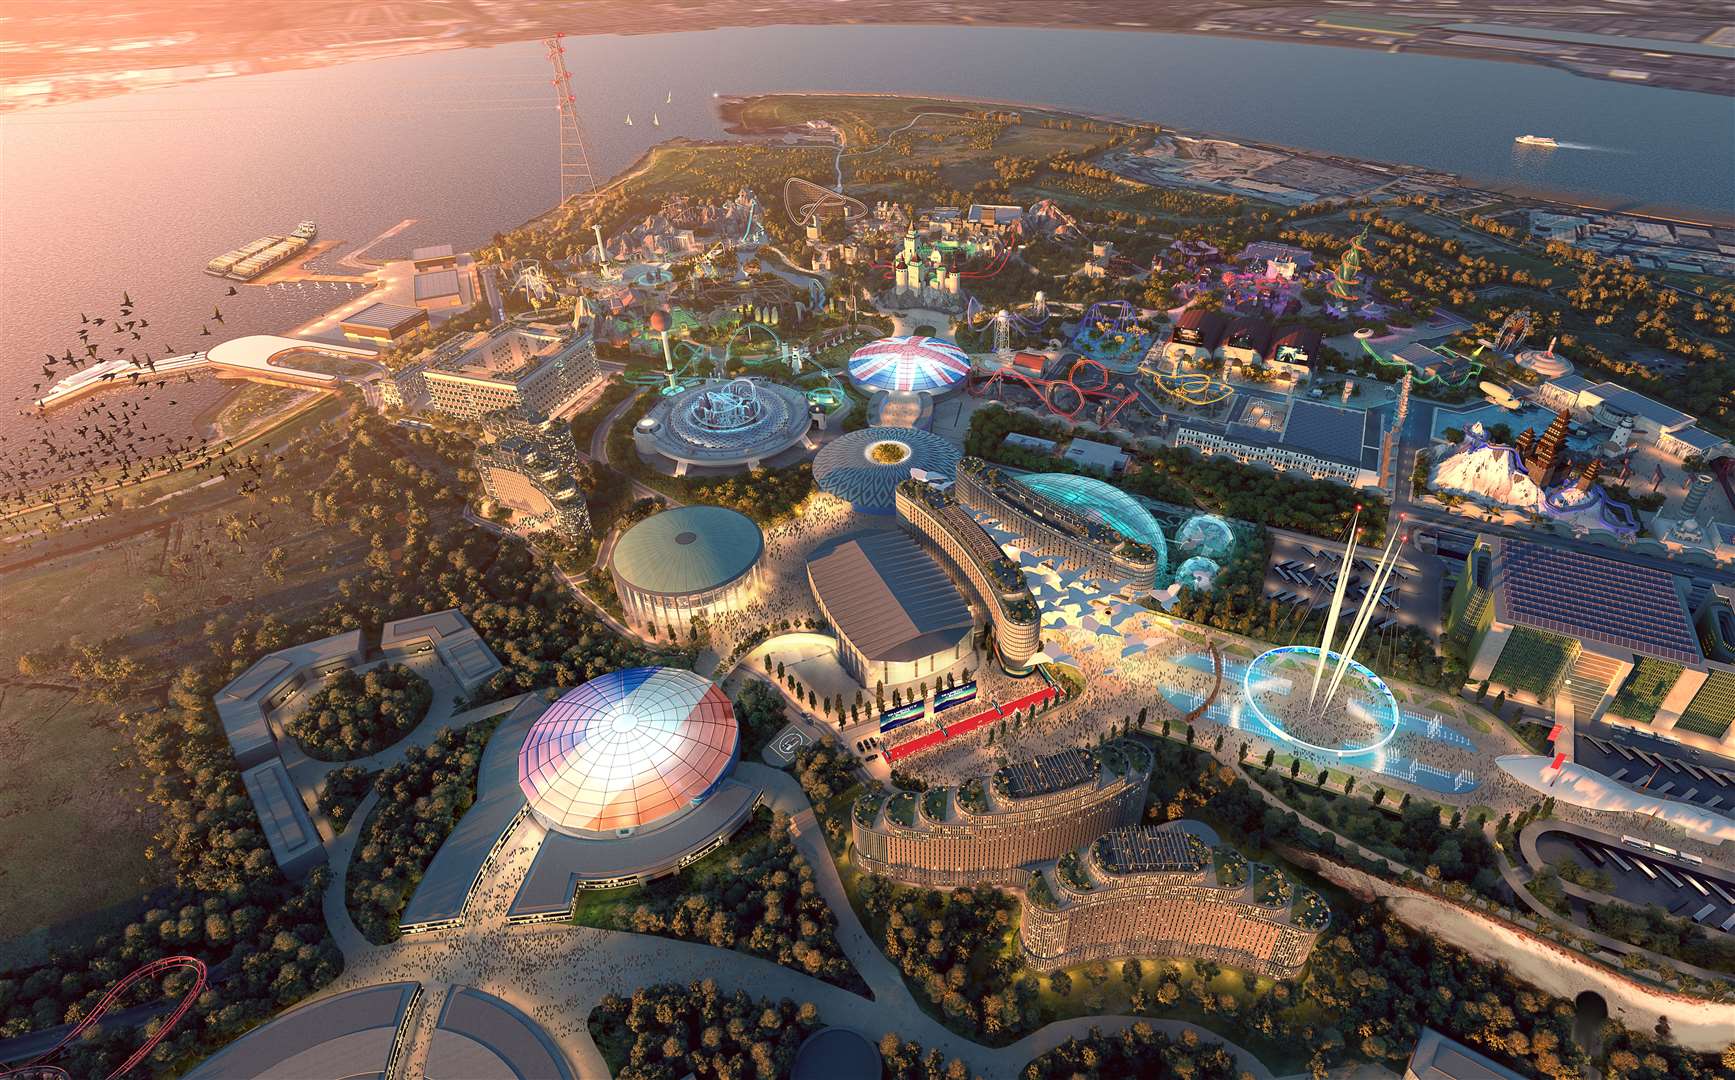 A detailed impression of what the London Resort theme park would look like